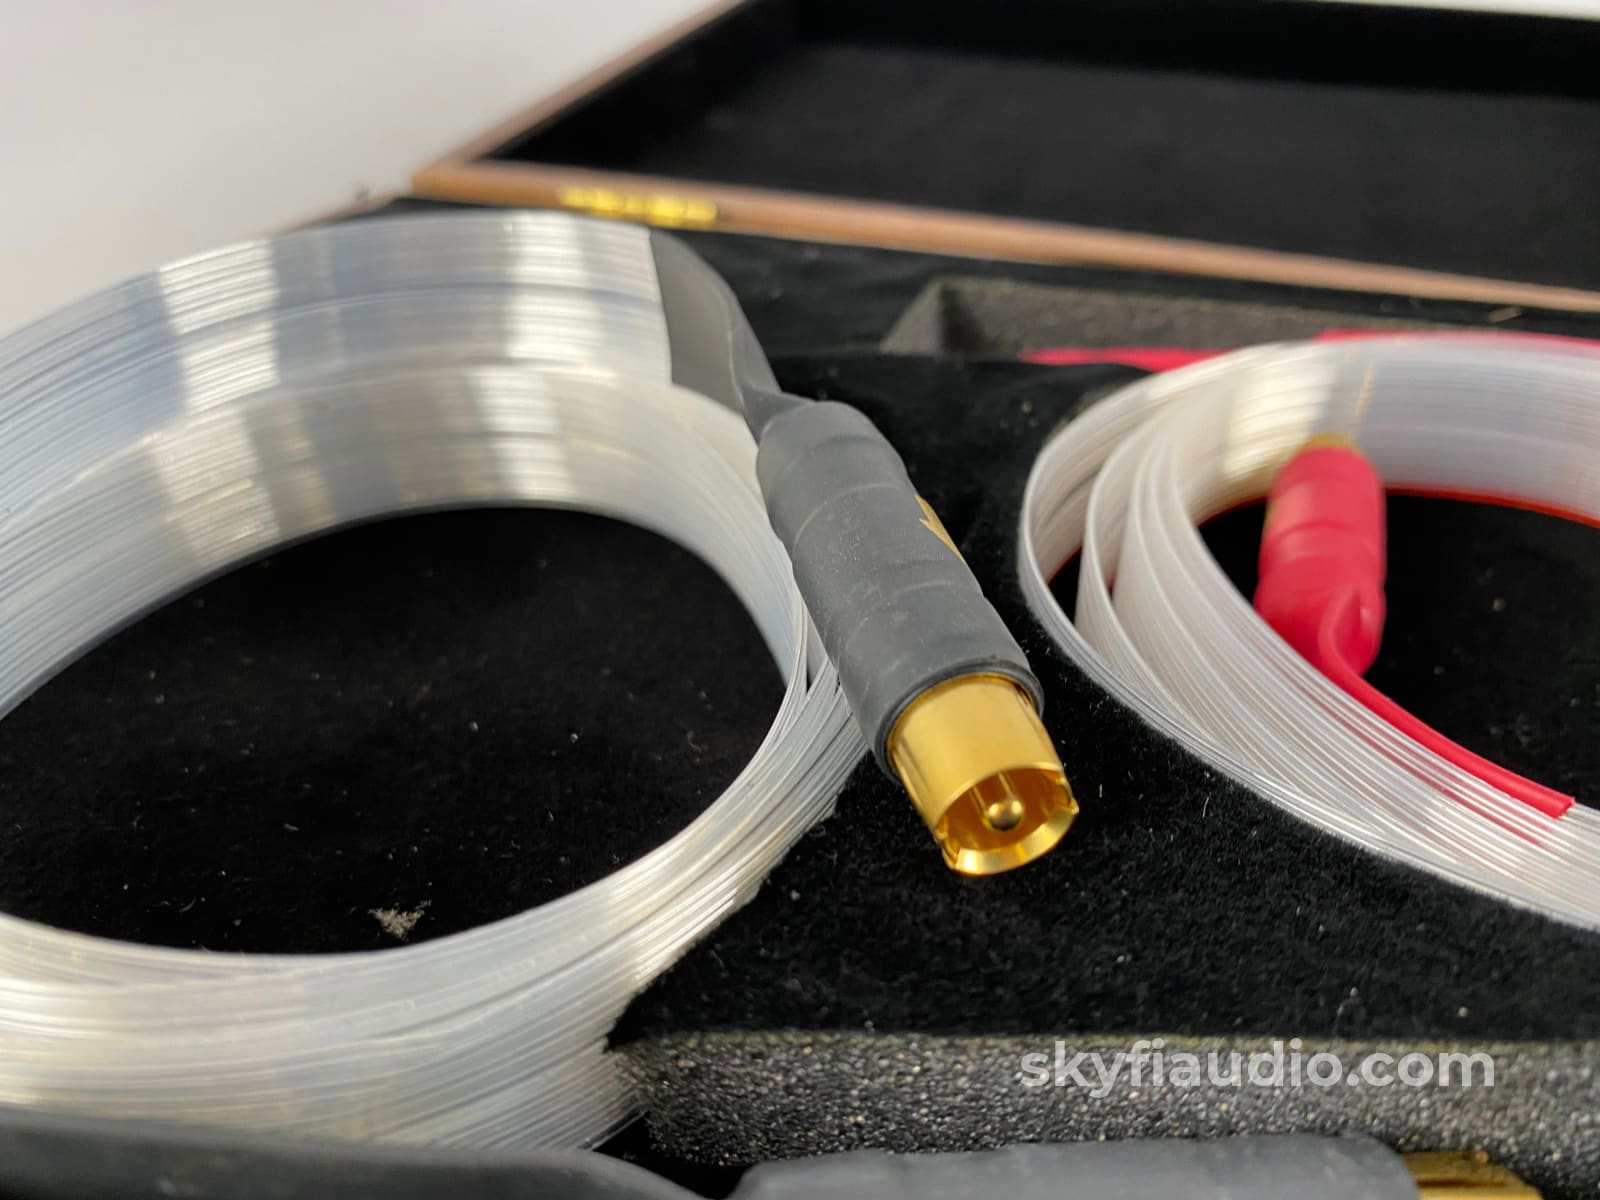 Nordost Leif Series - Red Dawn Rca Interconnects With Wood Case 2M Cables